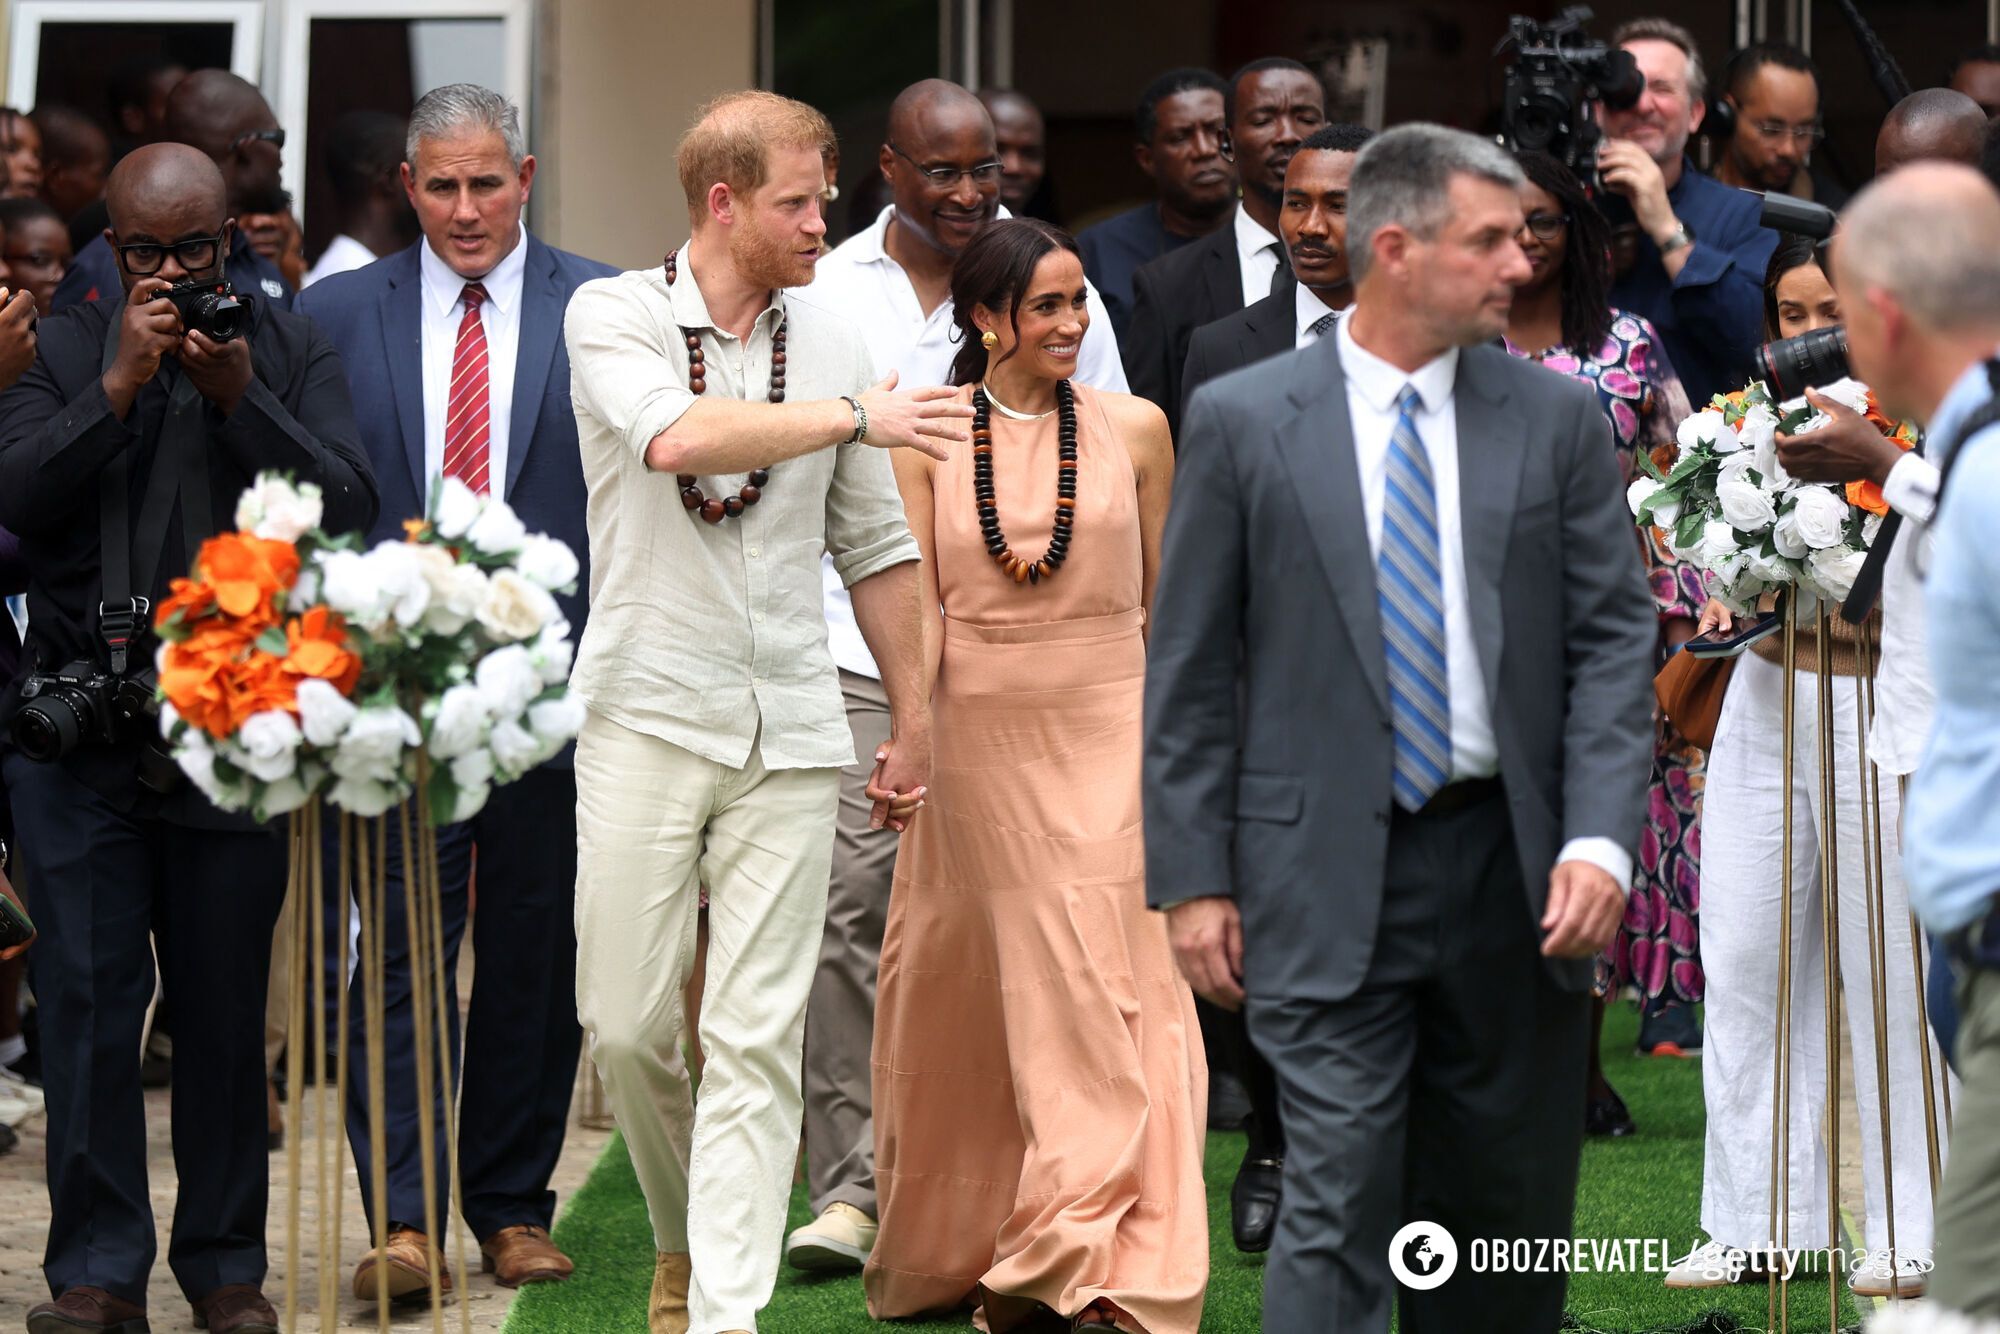 ''It's disrespectful''. Meghan Markle faces harsh criticism over her dress during a trip to Nigeria: what's wrong with her